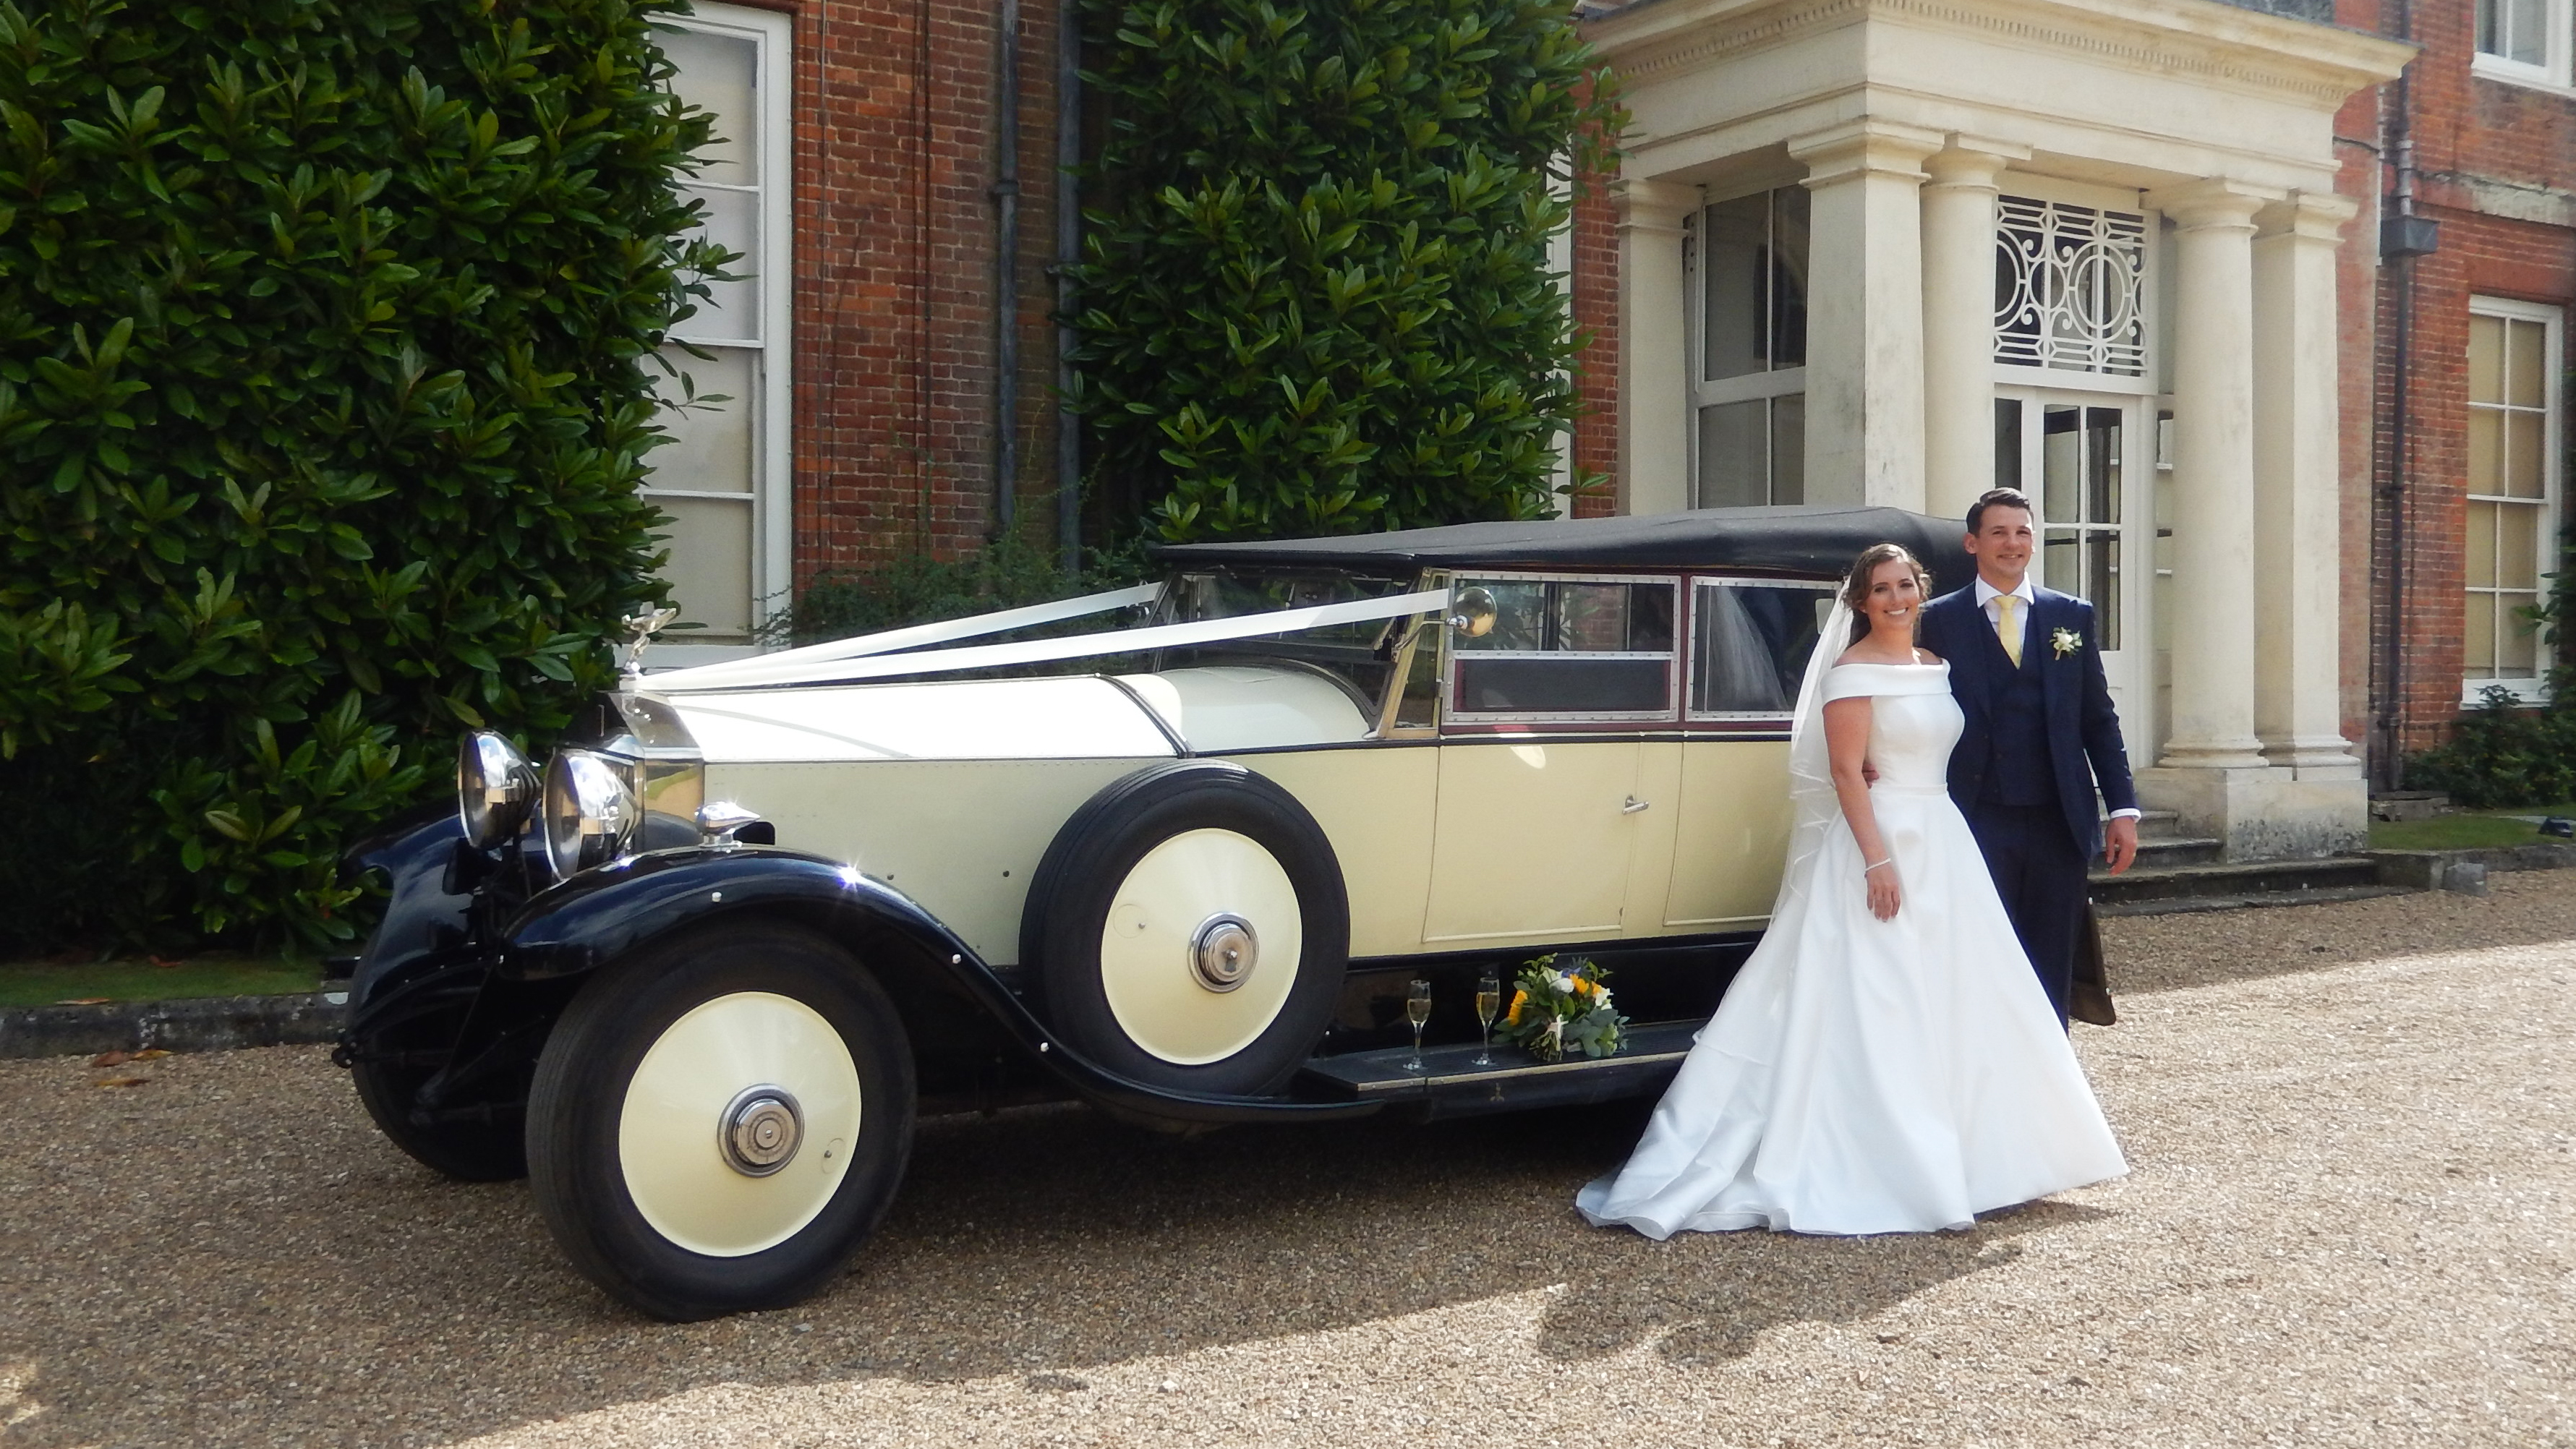 Vintage Rolls-Royce convertible with roof up decorated with traditional white wedding ribbons across its bonnet at a local Sunbury-on-Thames wedding venue. Spare wheel mounted on s